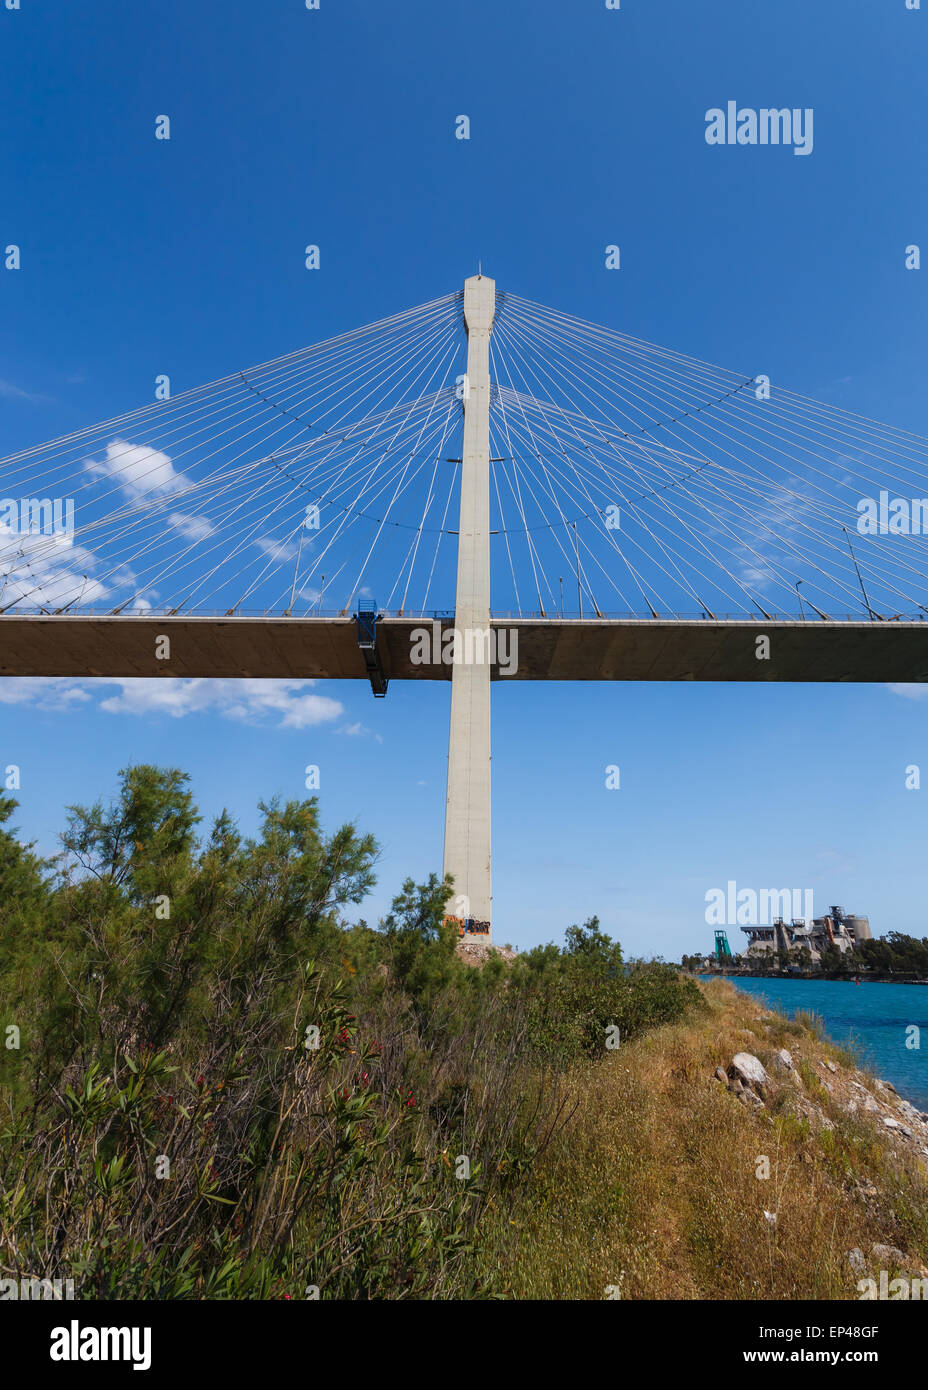 https://c8.alamy.com/comp/EP48GF/the-new-cable-bridge-of-chalkida-greece-that-connects-the-island-of-EP48GF.jpg